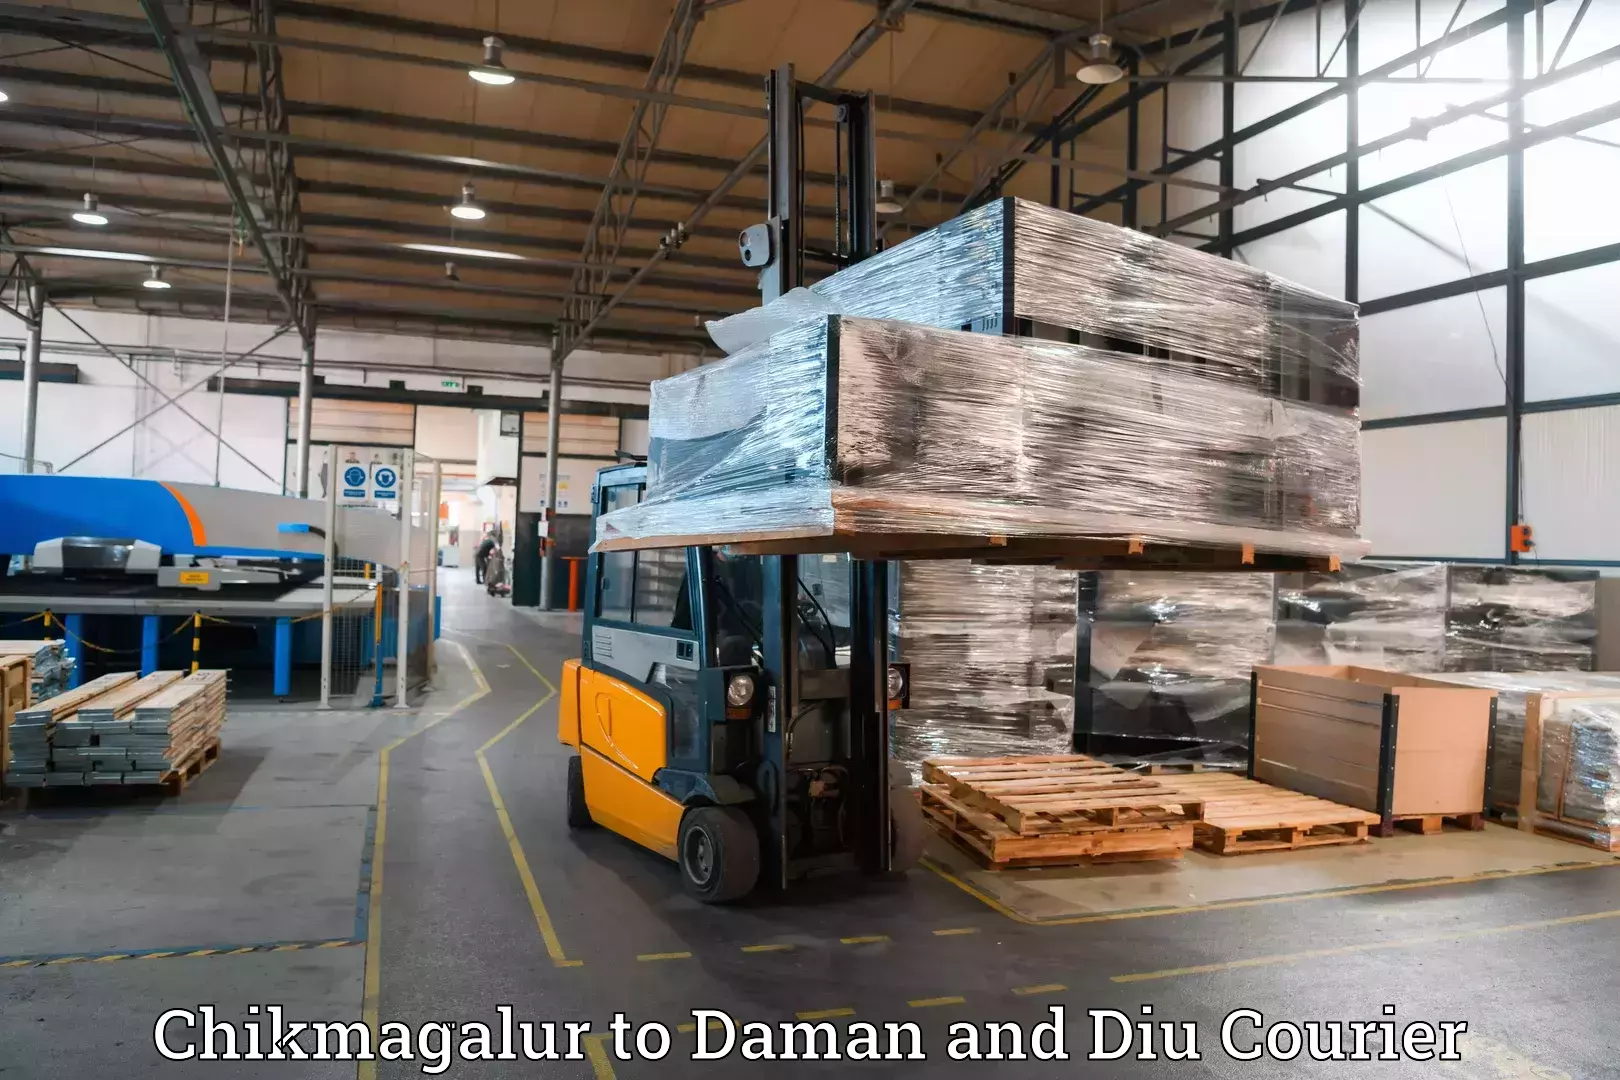 Baggage shipping experience Chikmagalur to Daman and Diu